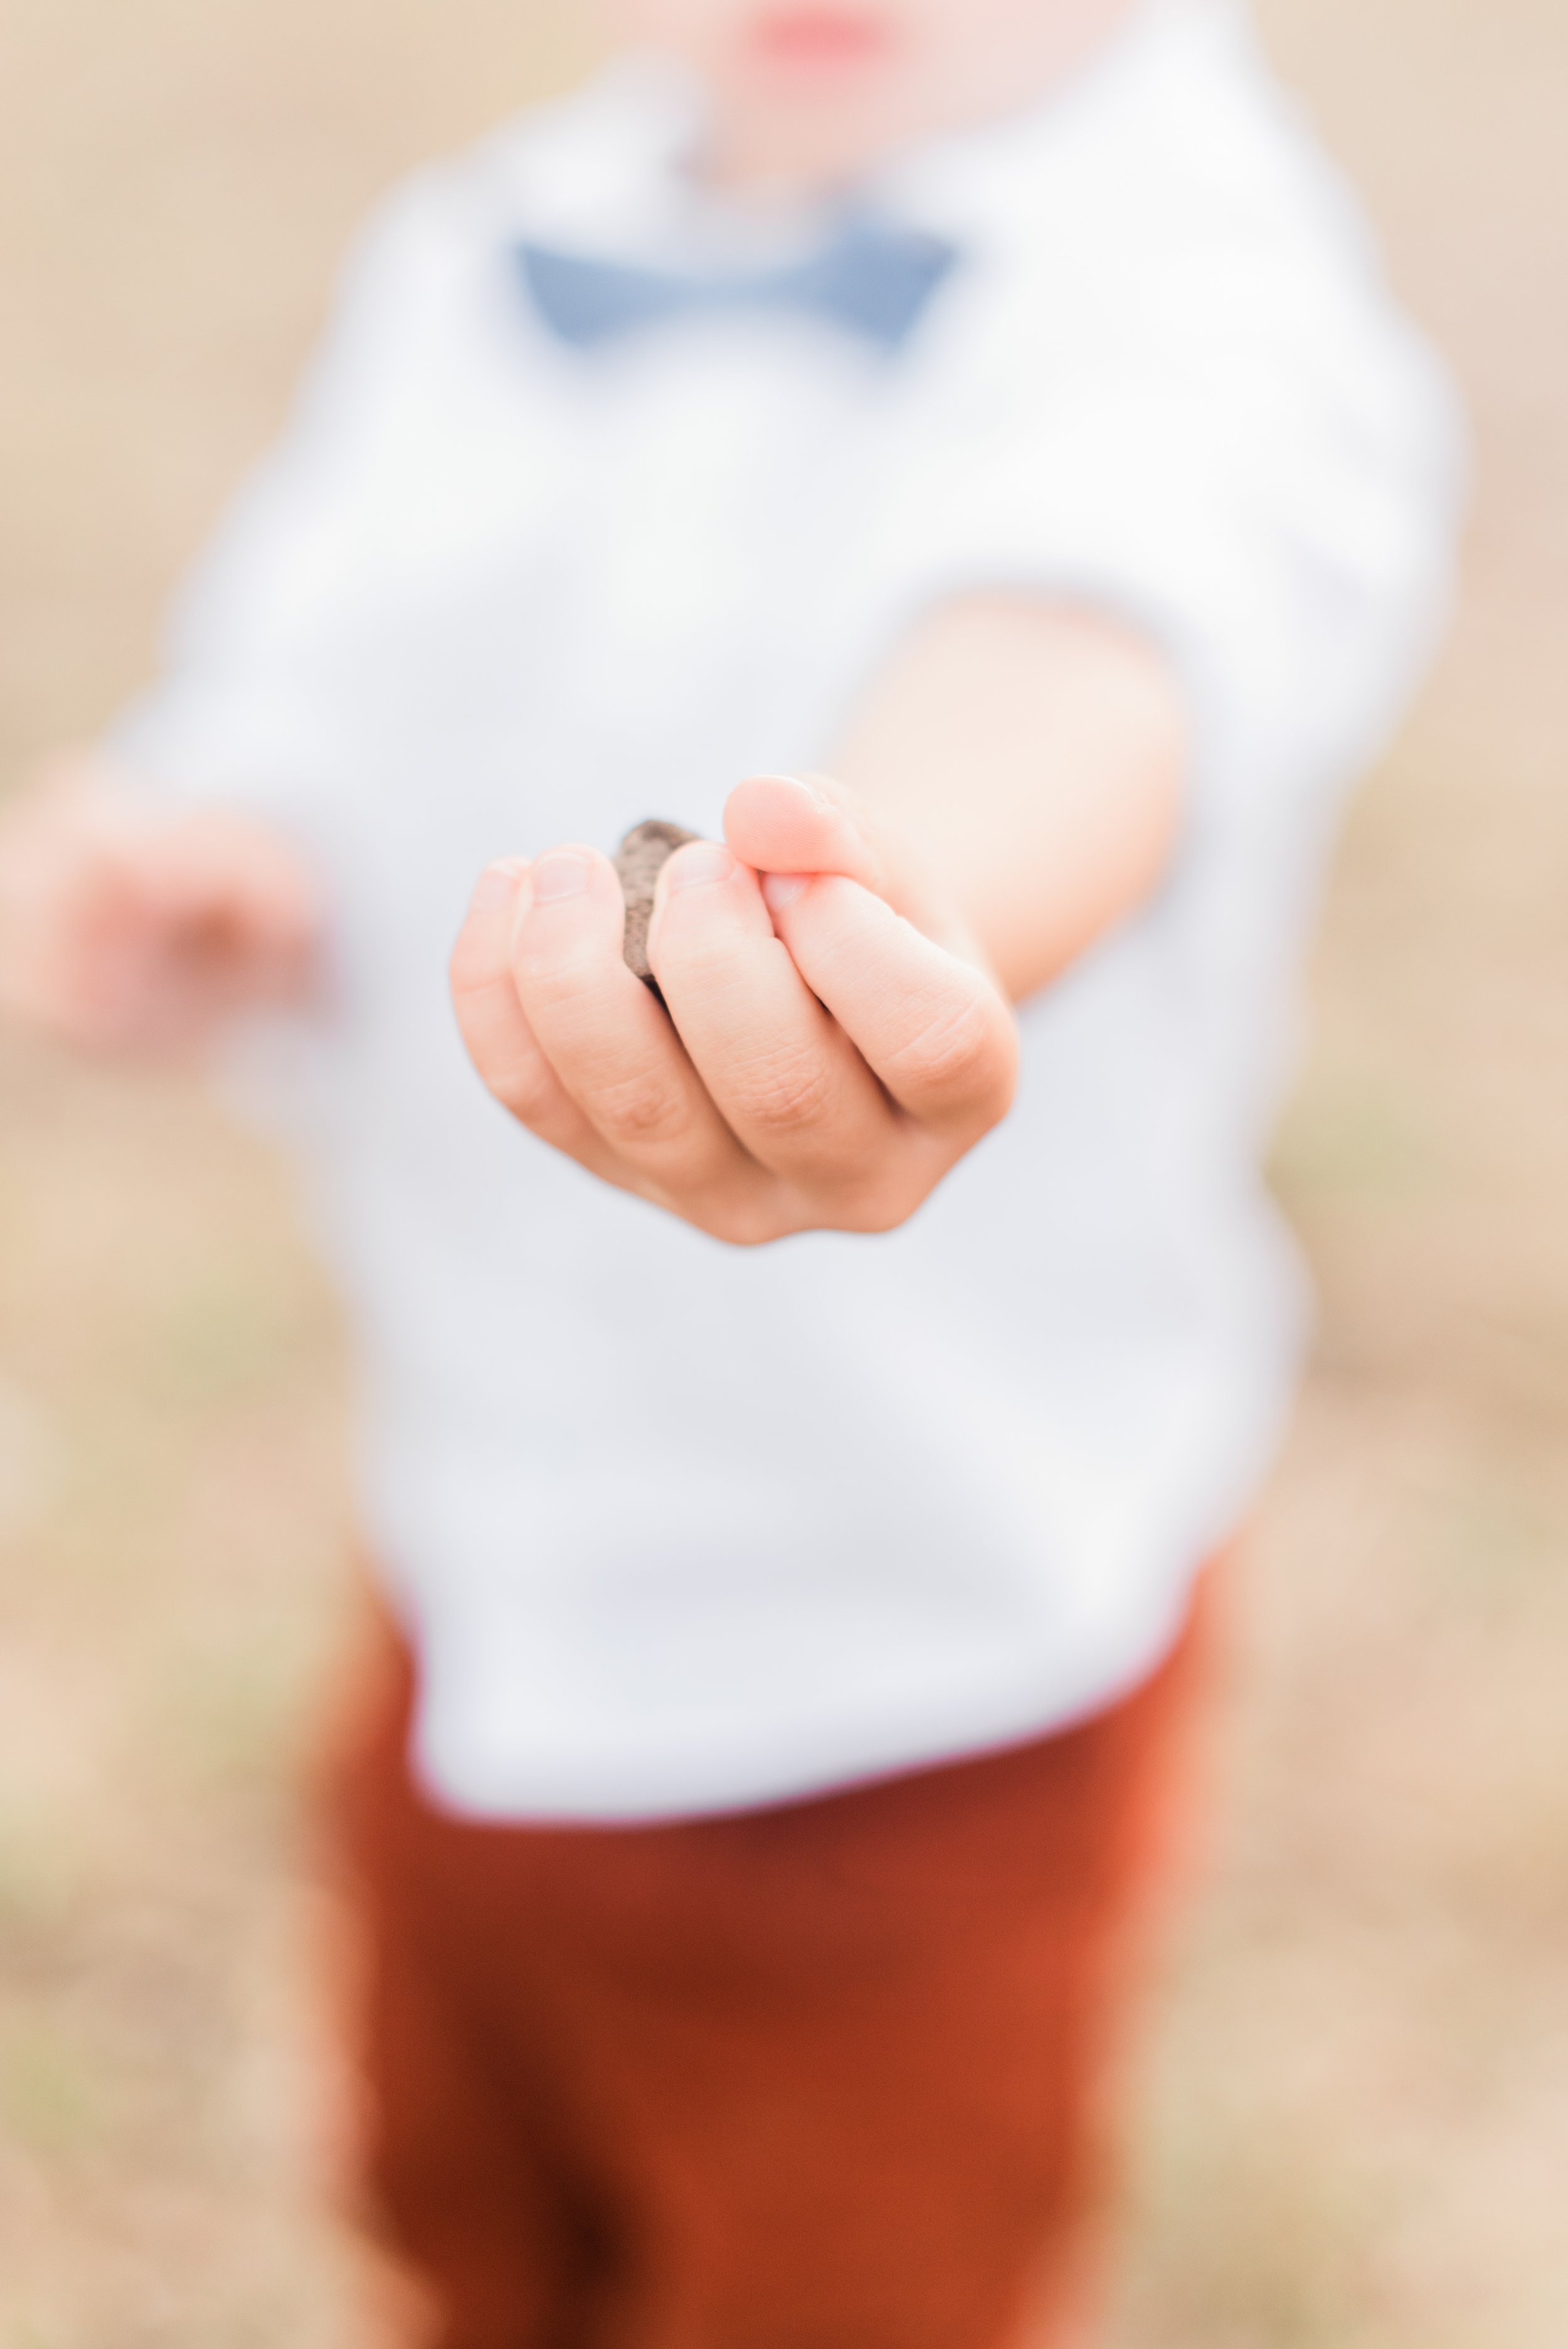  I love the way this portrait of a Sandy Springs boy holding rocks showcases his age and unique personality. #marylandfamilyphotographer #onlinephotographycourse #photographytips #familyphotosession #diyfamilyphotos #kidportraits #candidfamilyphotos 